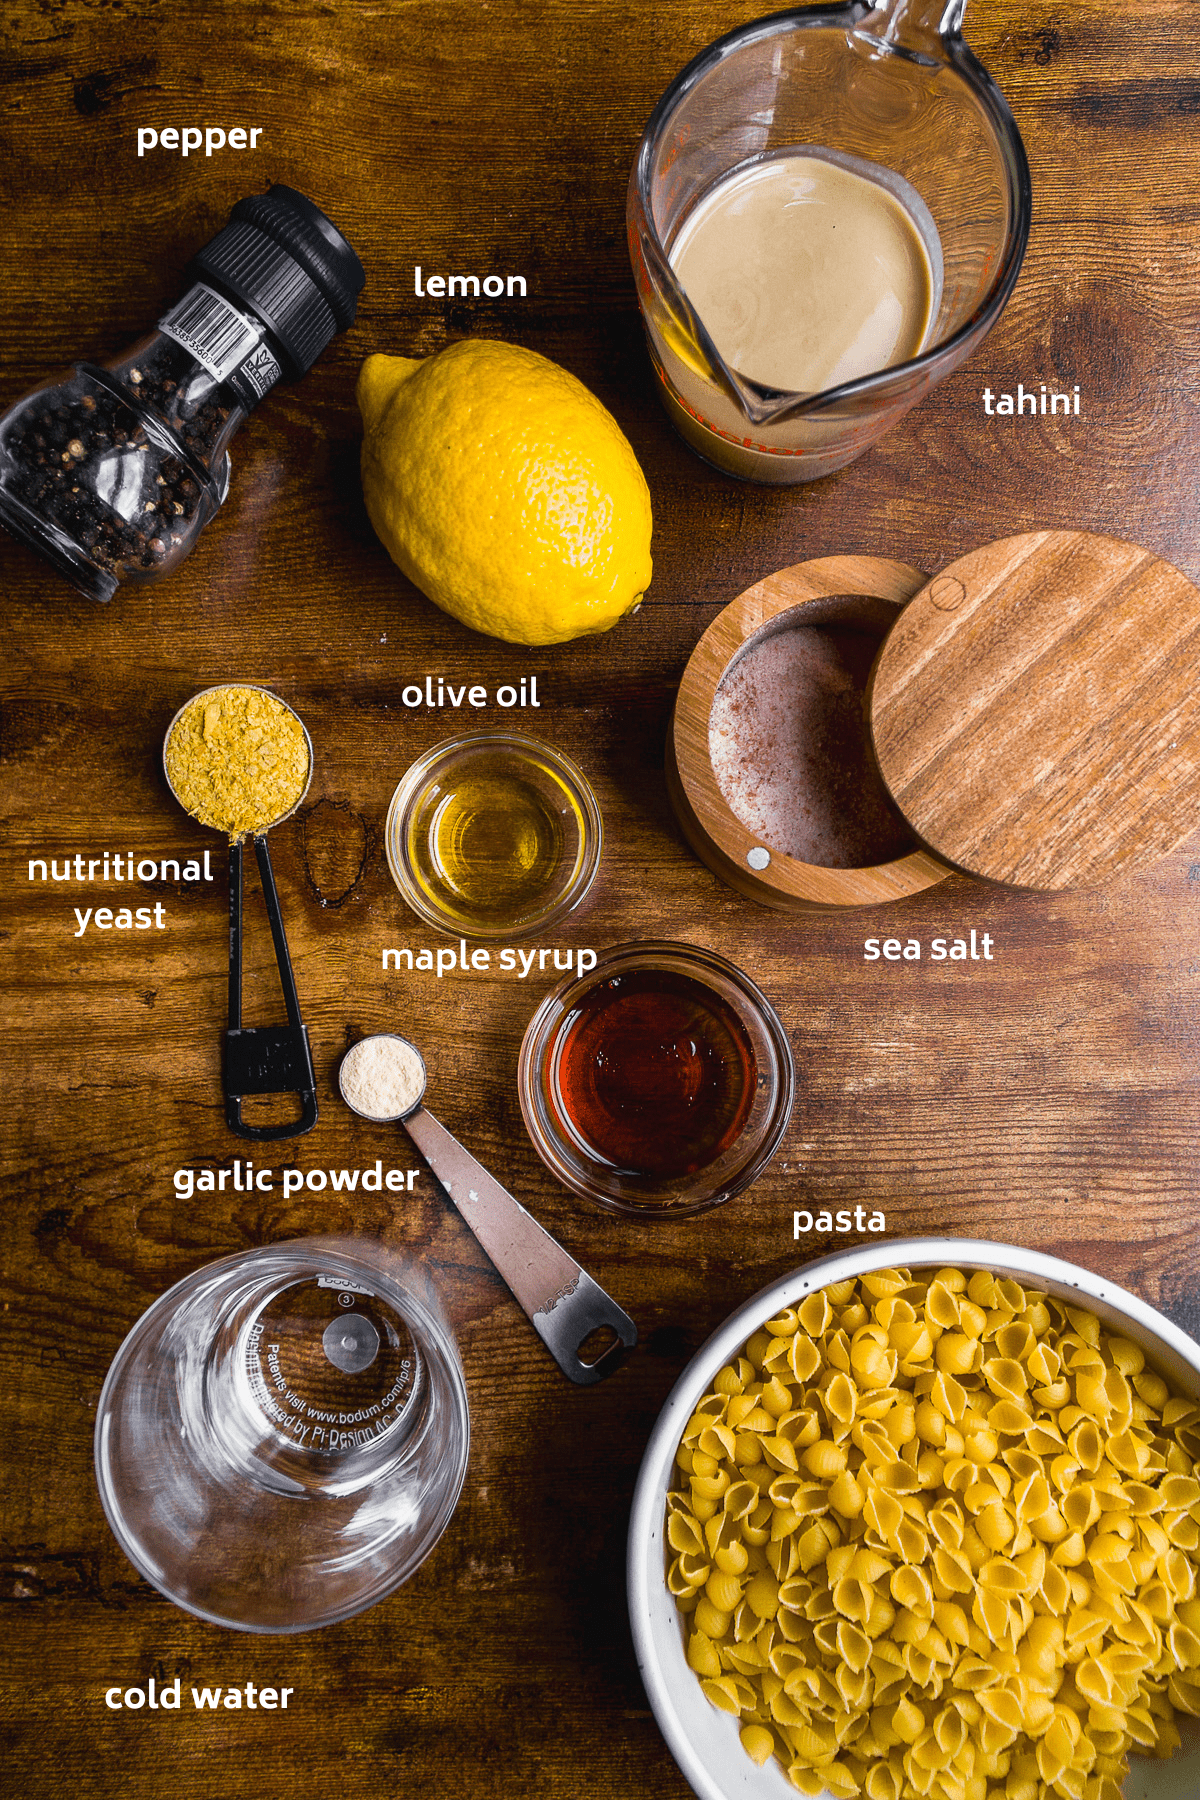 Tahini pasta ingredients on a wooden surface.